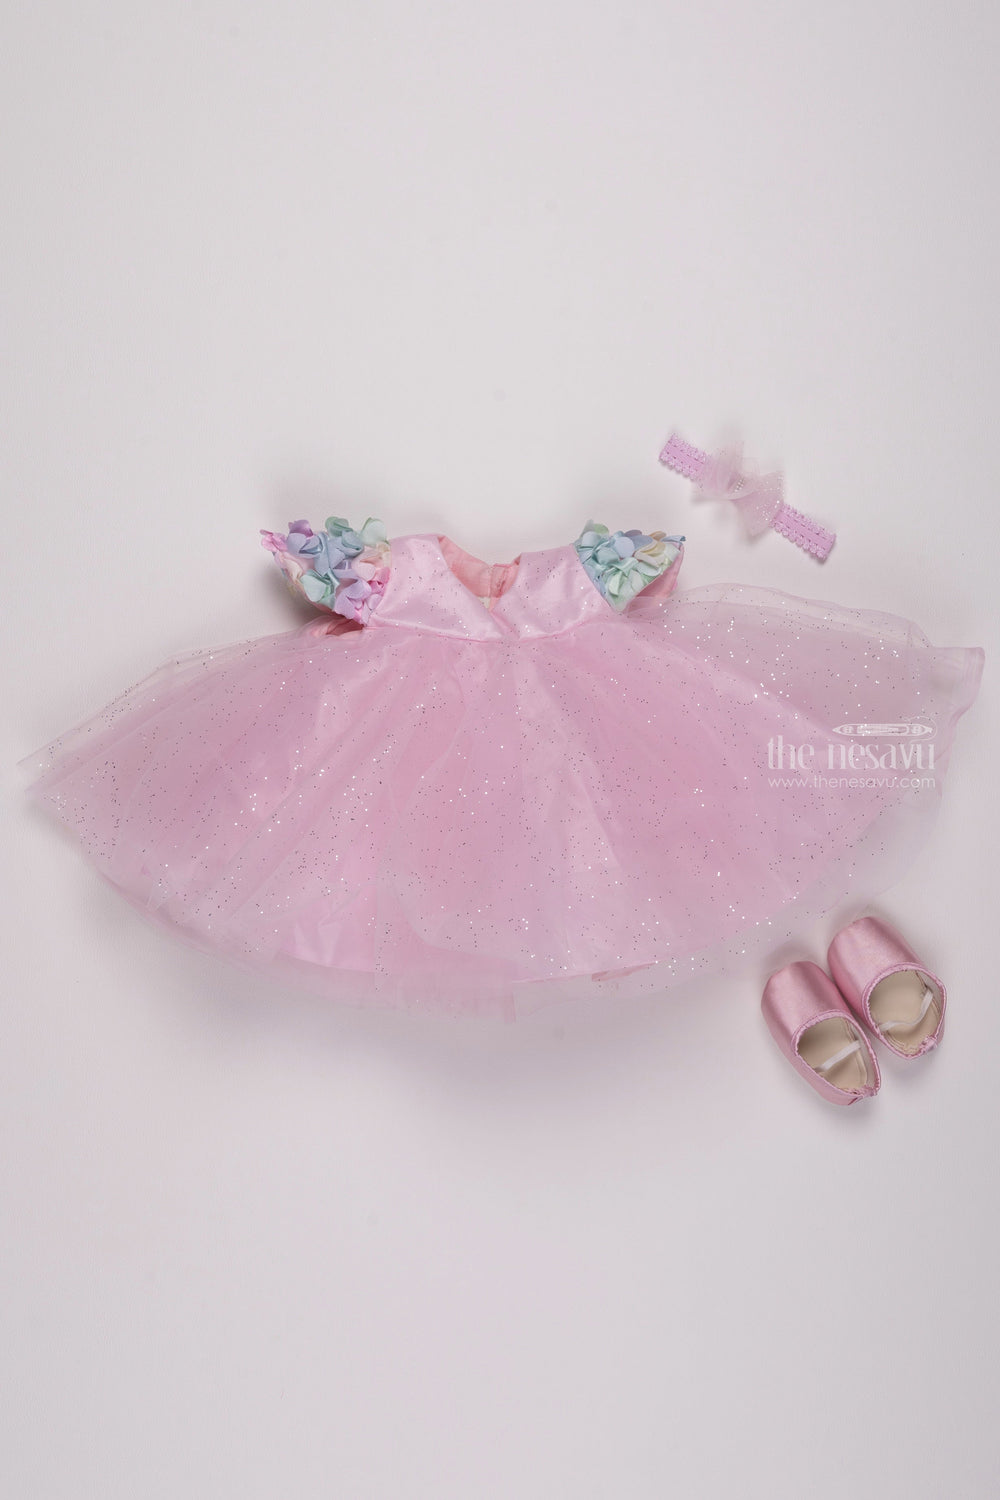 The Nesavu Girls Tutu Frock Pink Perfection: Glittering Net Frock with Delicate Floral Highlights for Girls Nesavu Chic & Trendy: Discover our Baby Girl Party Wear Frocks Collection | The Nesavu